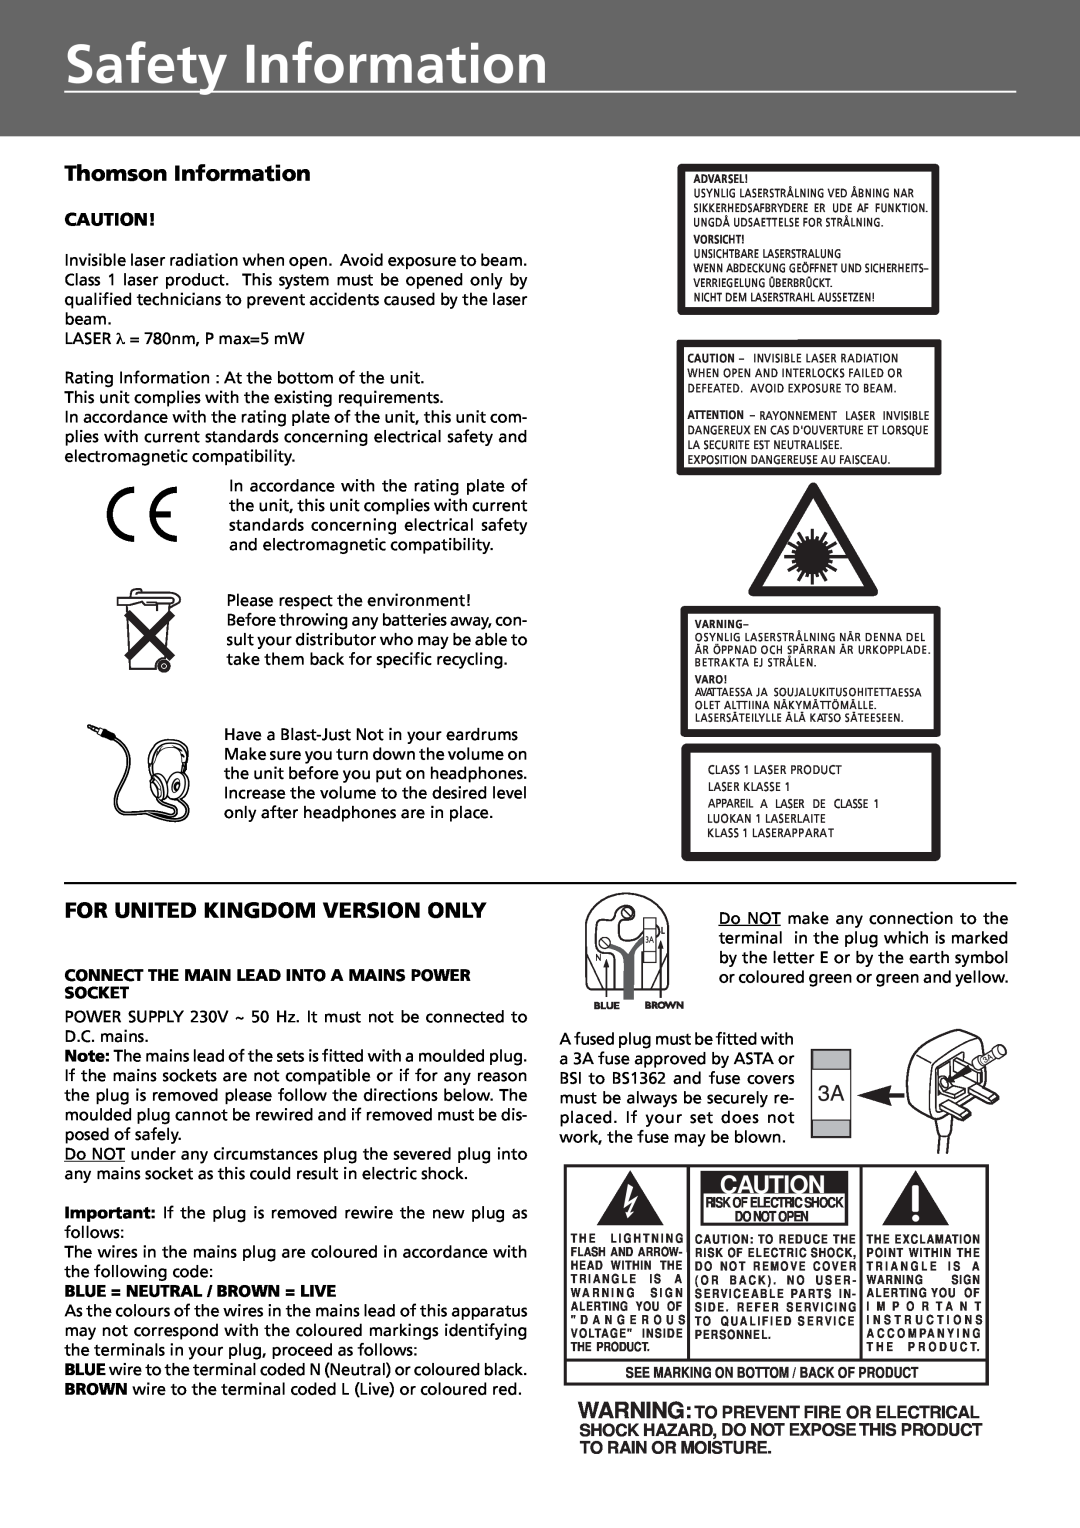 Technicolor - Thomson DPL4911 manual Safety Information, Thomson Information, For United Kingdom Version Only 